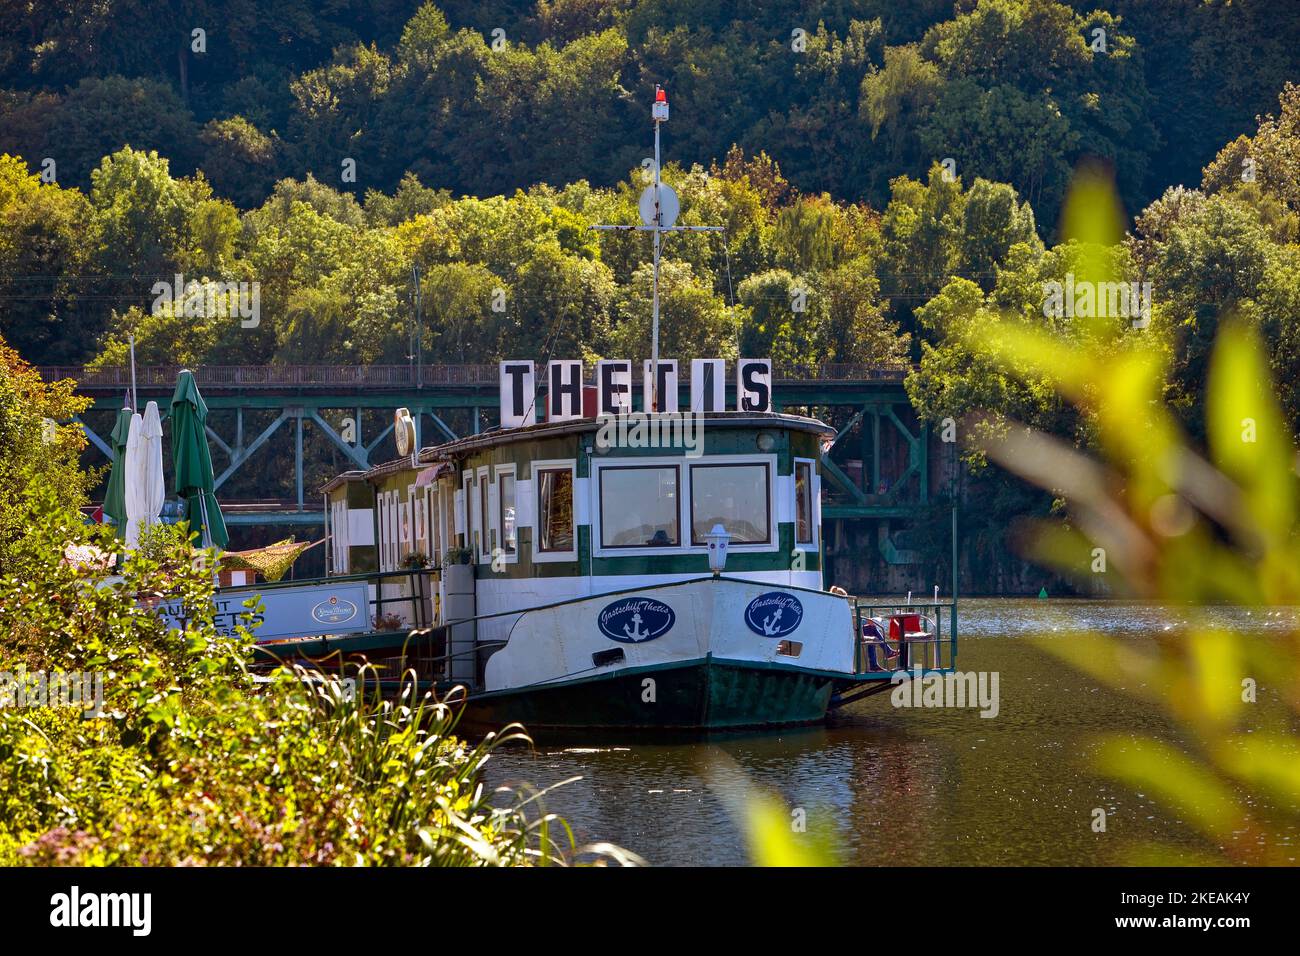 restaurant ship Thetis on the reservoir on the Ruhr Valley Cycle Path, Kettwig, Germany, North Rhine-Westphalia, Ruhr Area, Essen Stock Photo